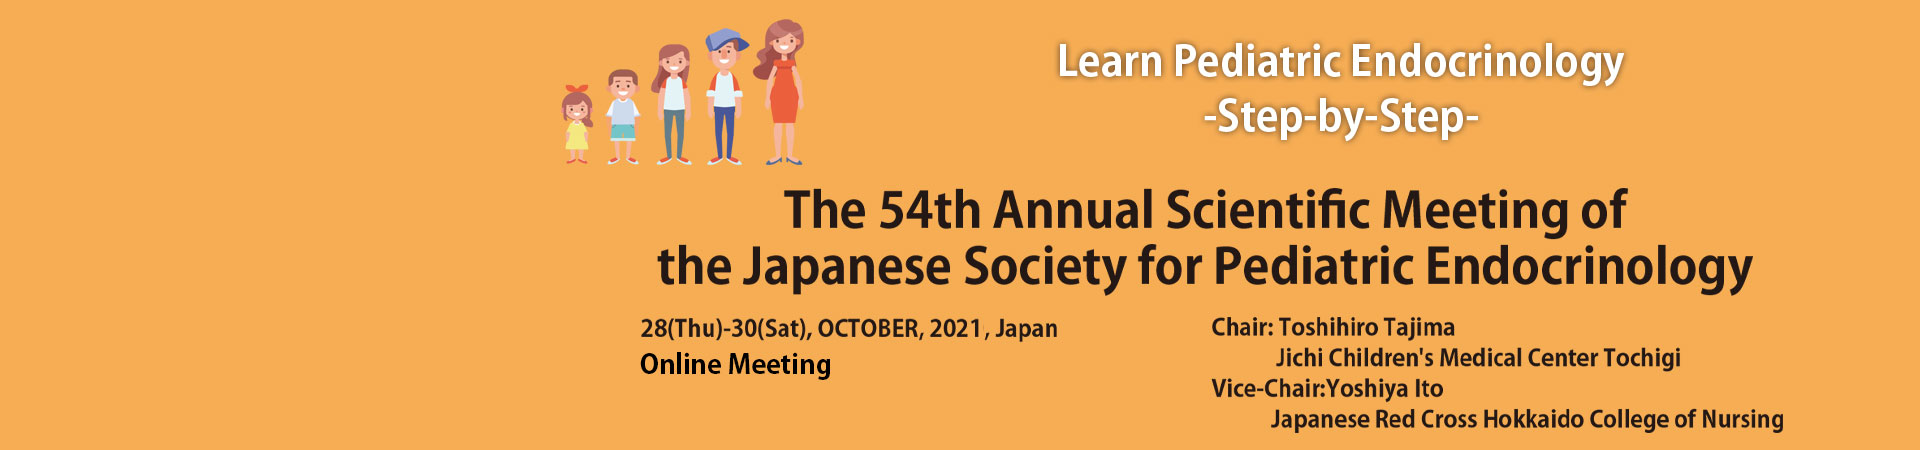 The 54th Annual Scientific Meeting of the Japanese Society for Pediatric Endocrinology